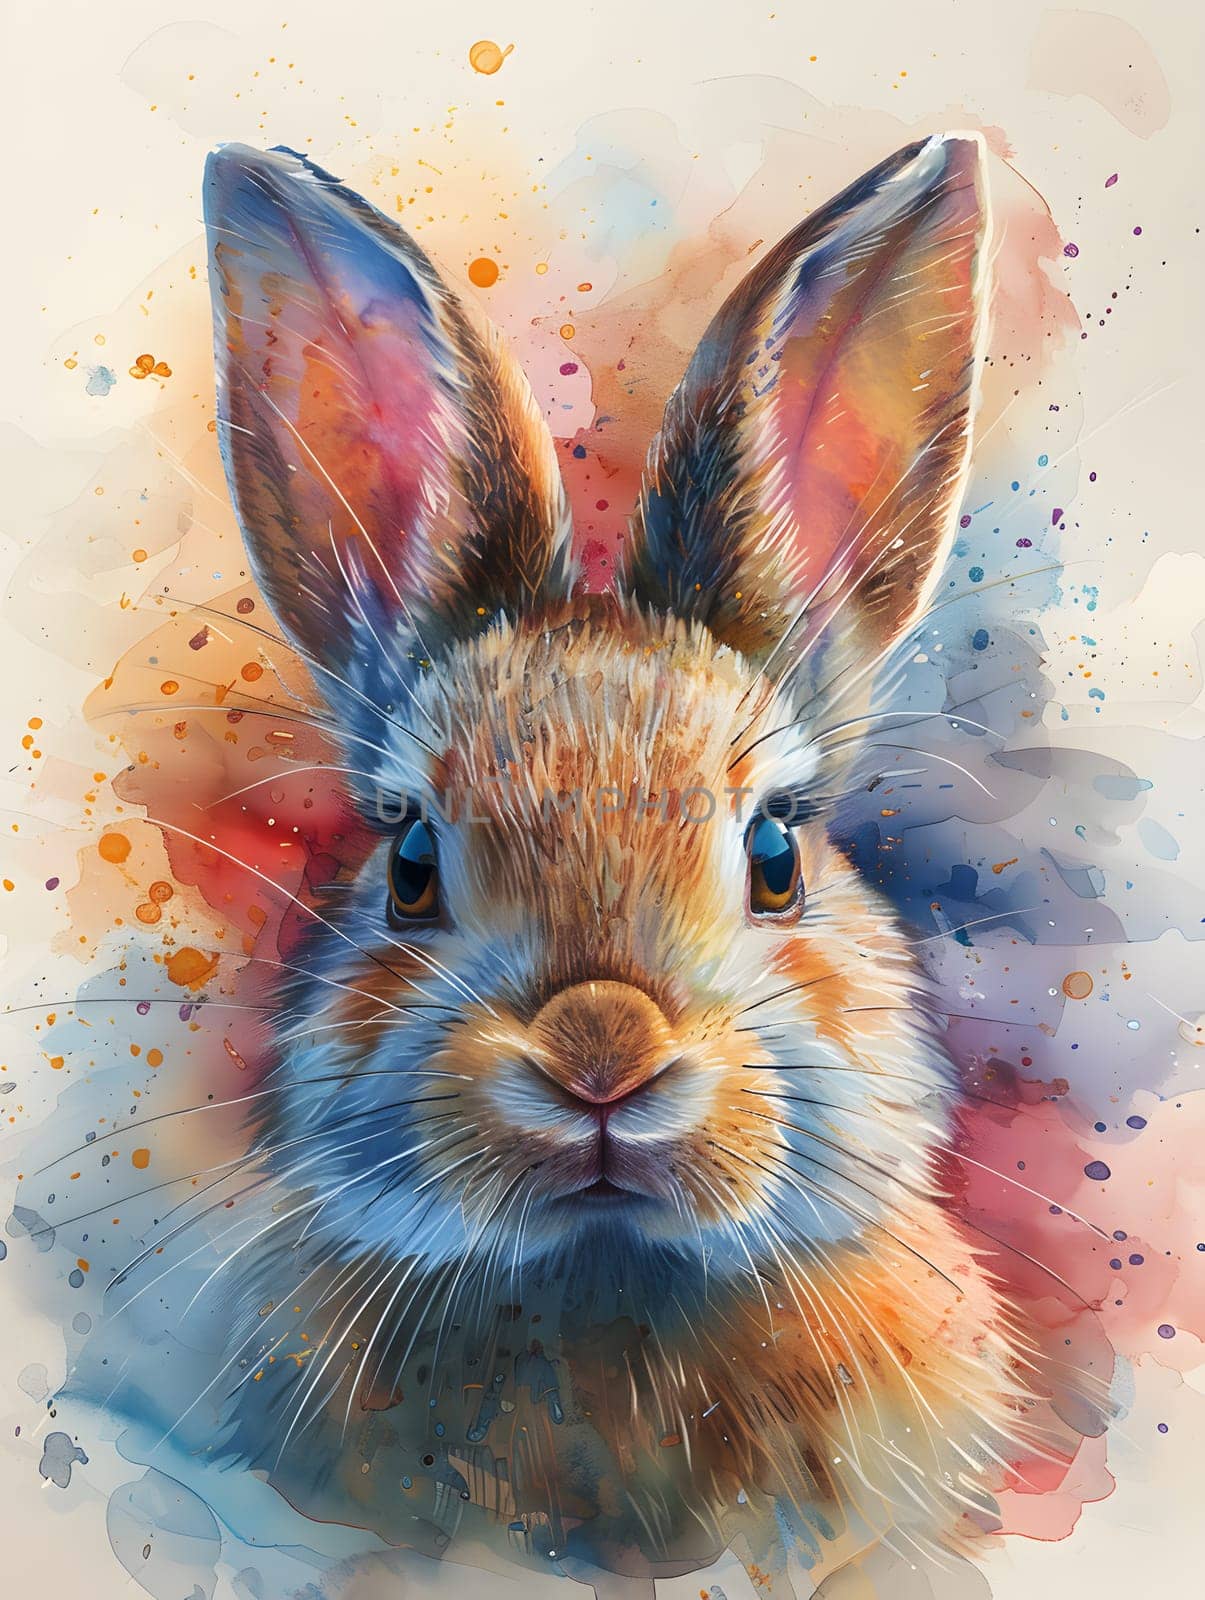 a watercolor painting of a rabbit with large ears looking at the camera by Nadtochiy